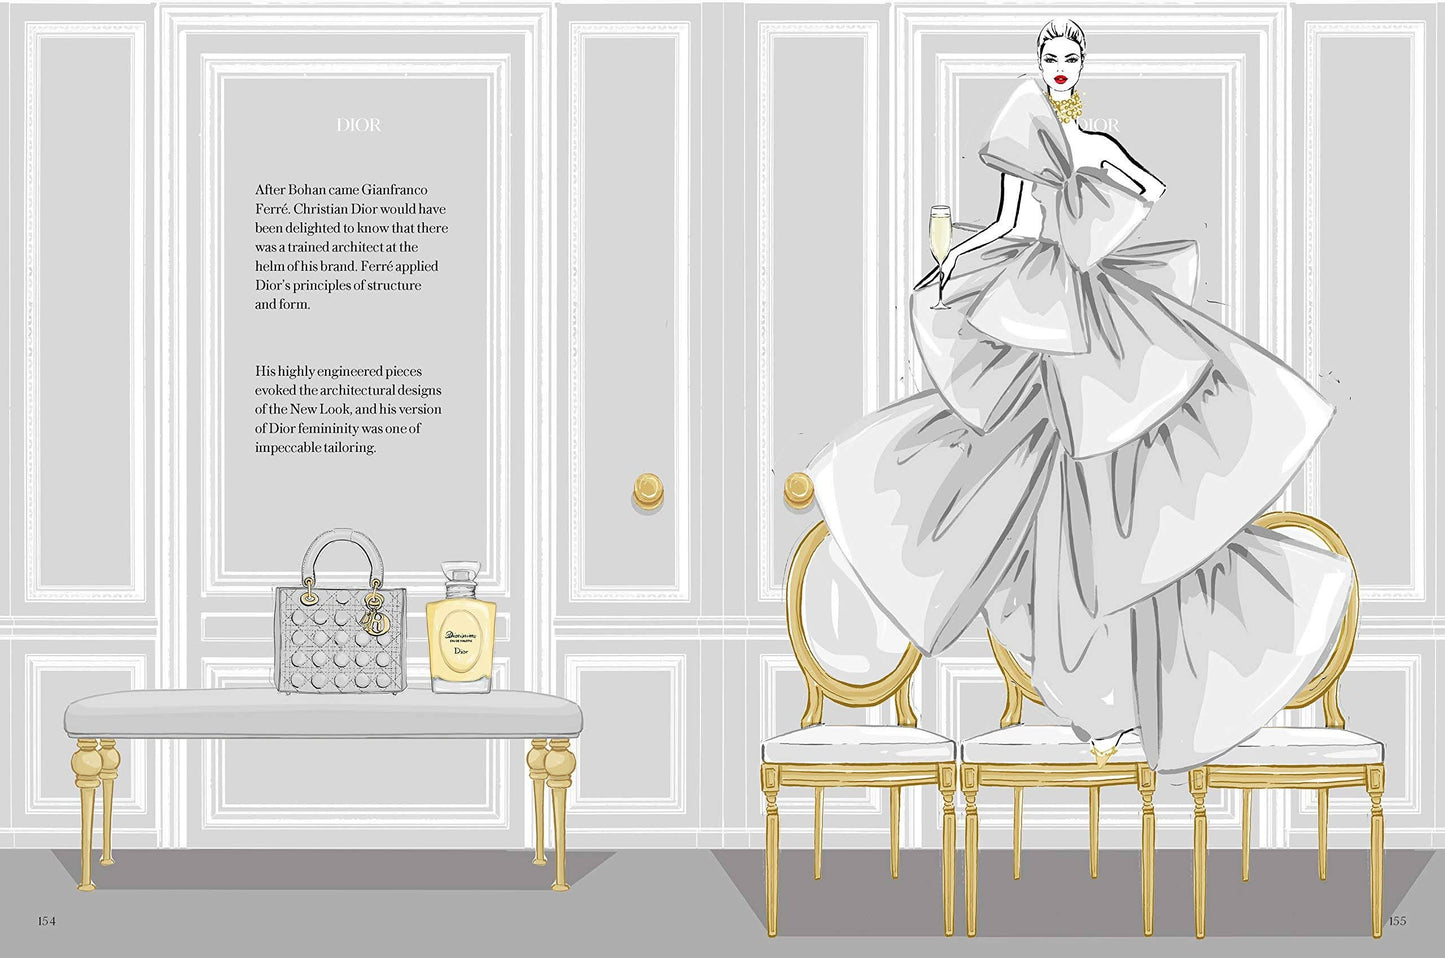 Christian Dior: The Illustrated World of a Fashion Master